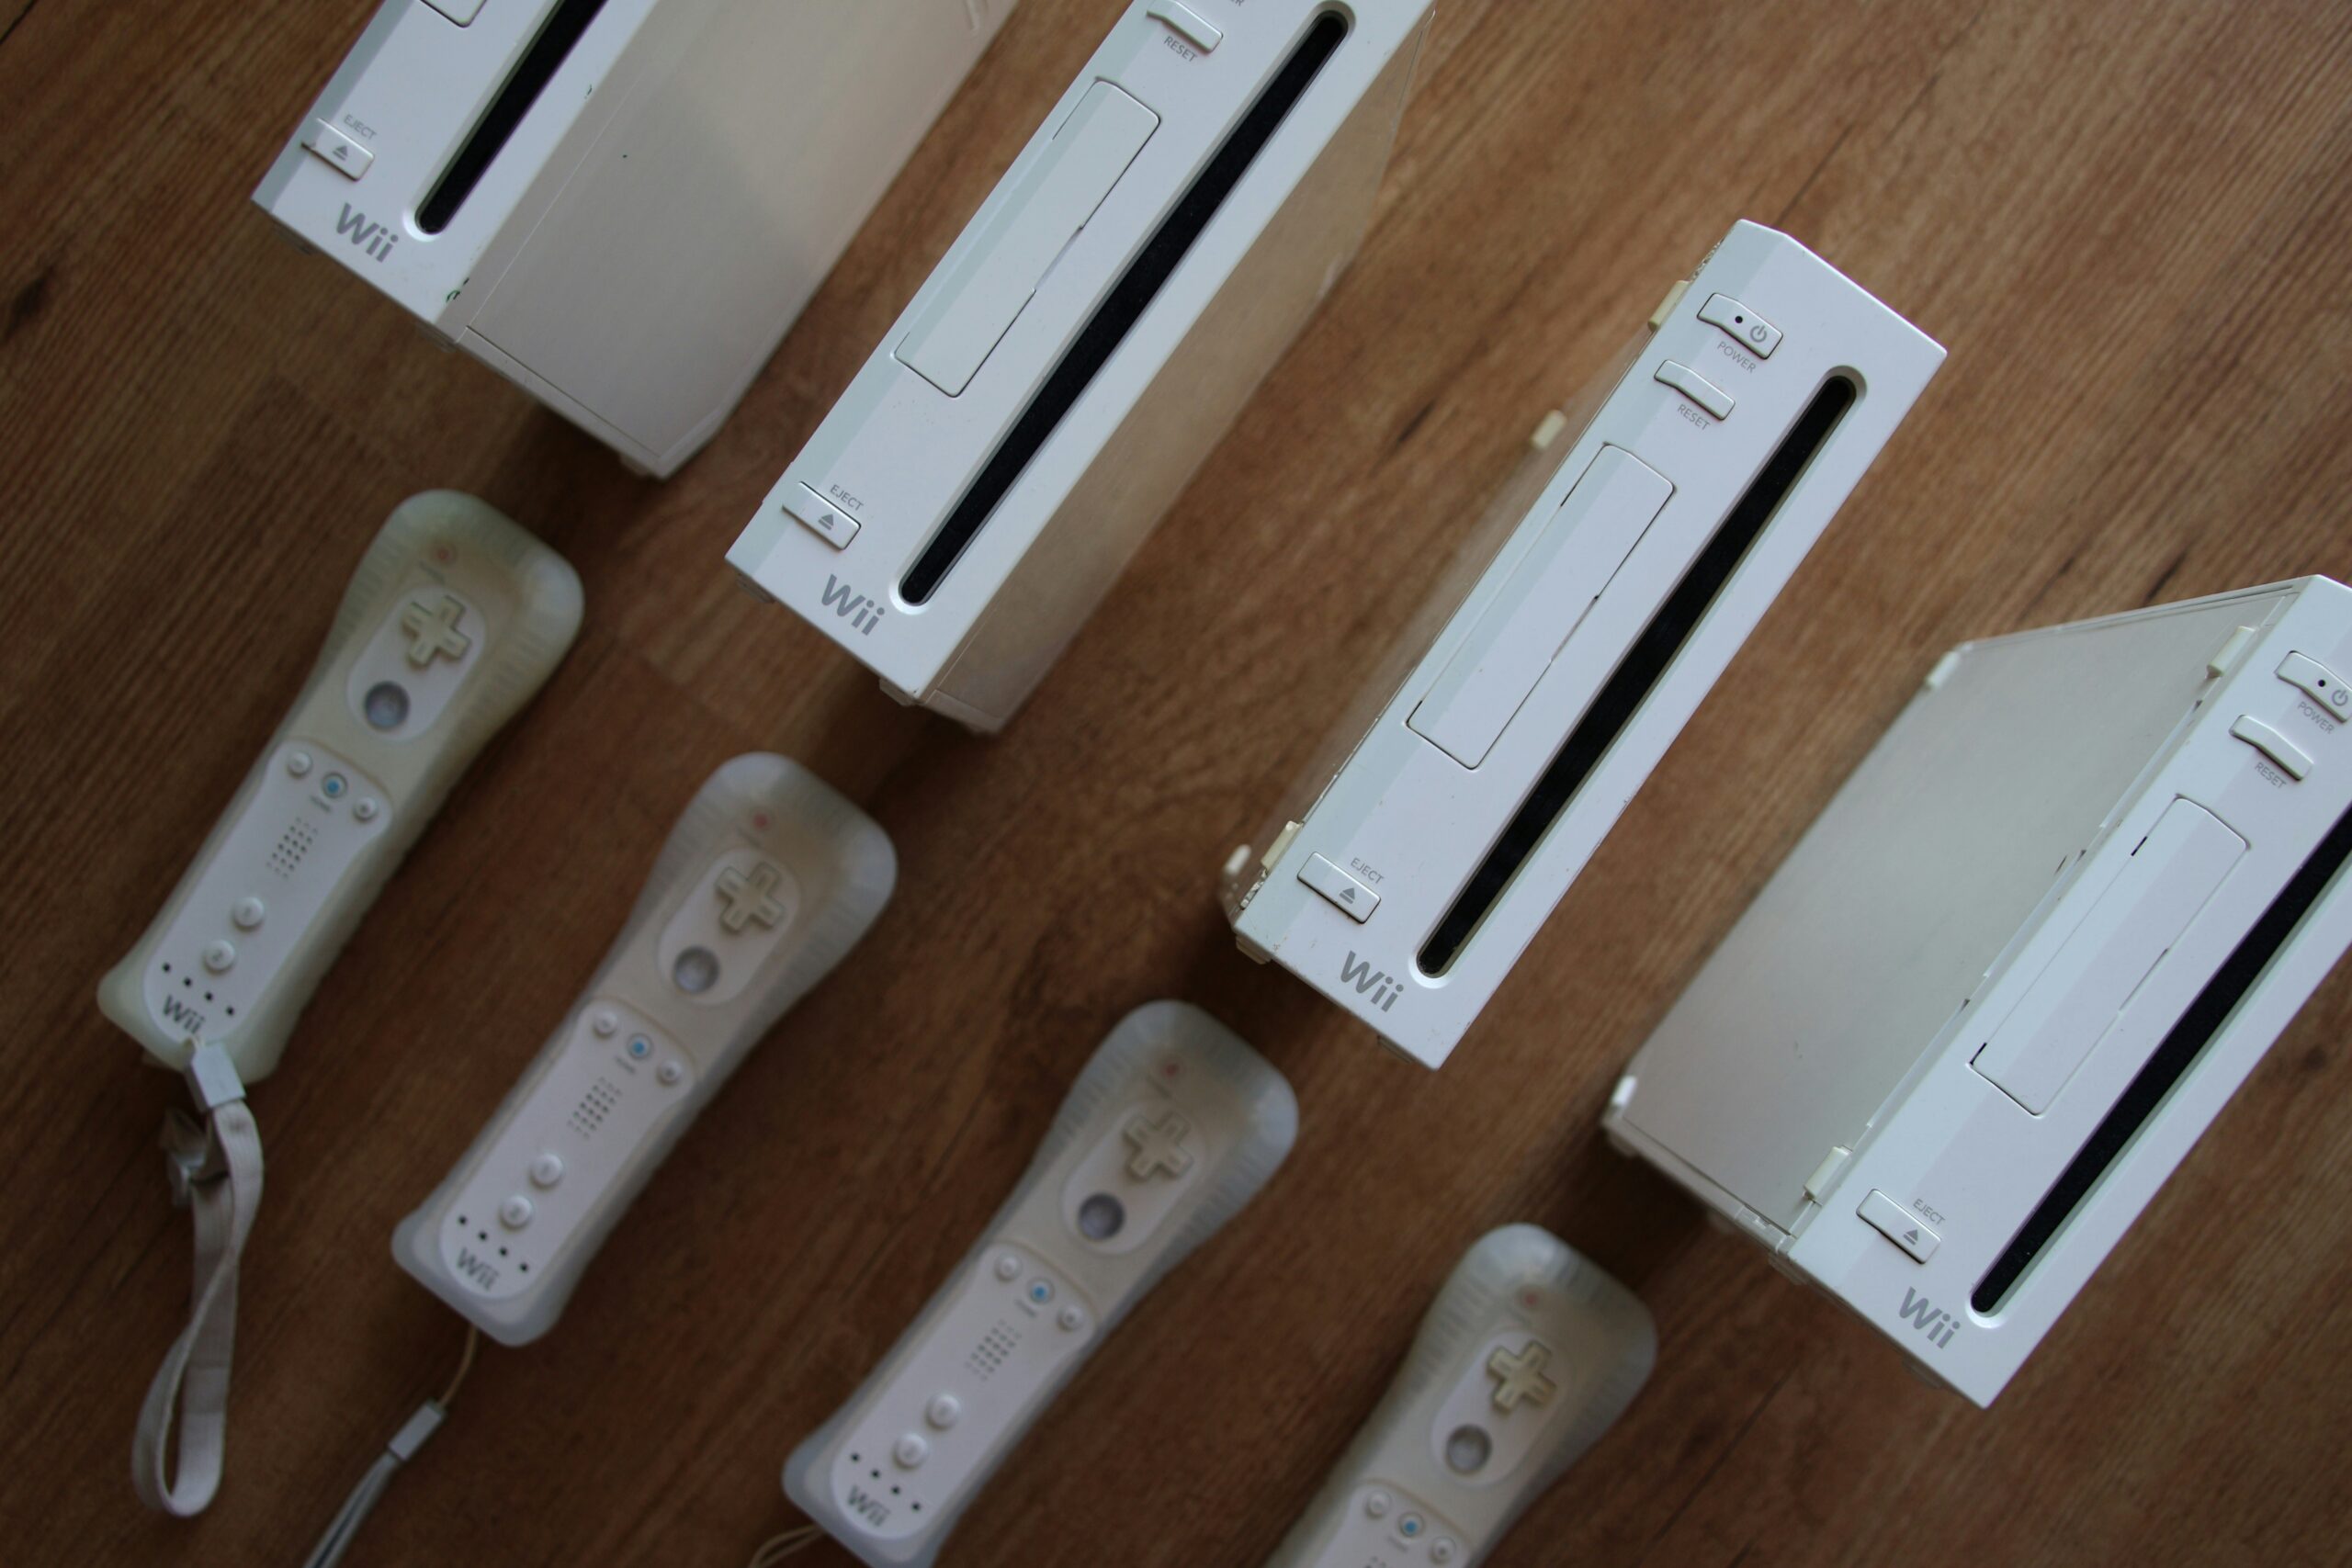 9. Nintendo Wii Gaming Console